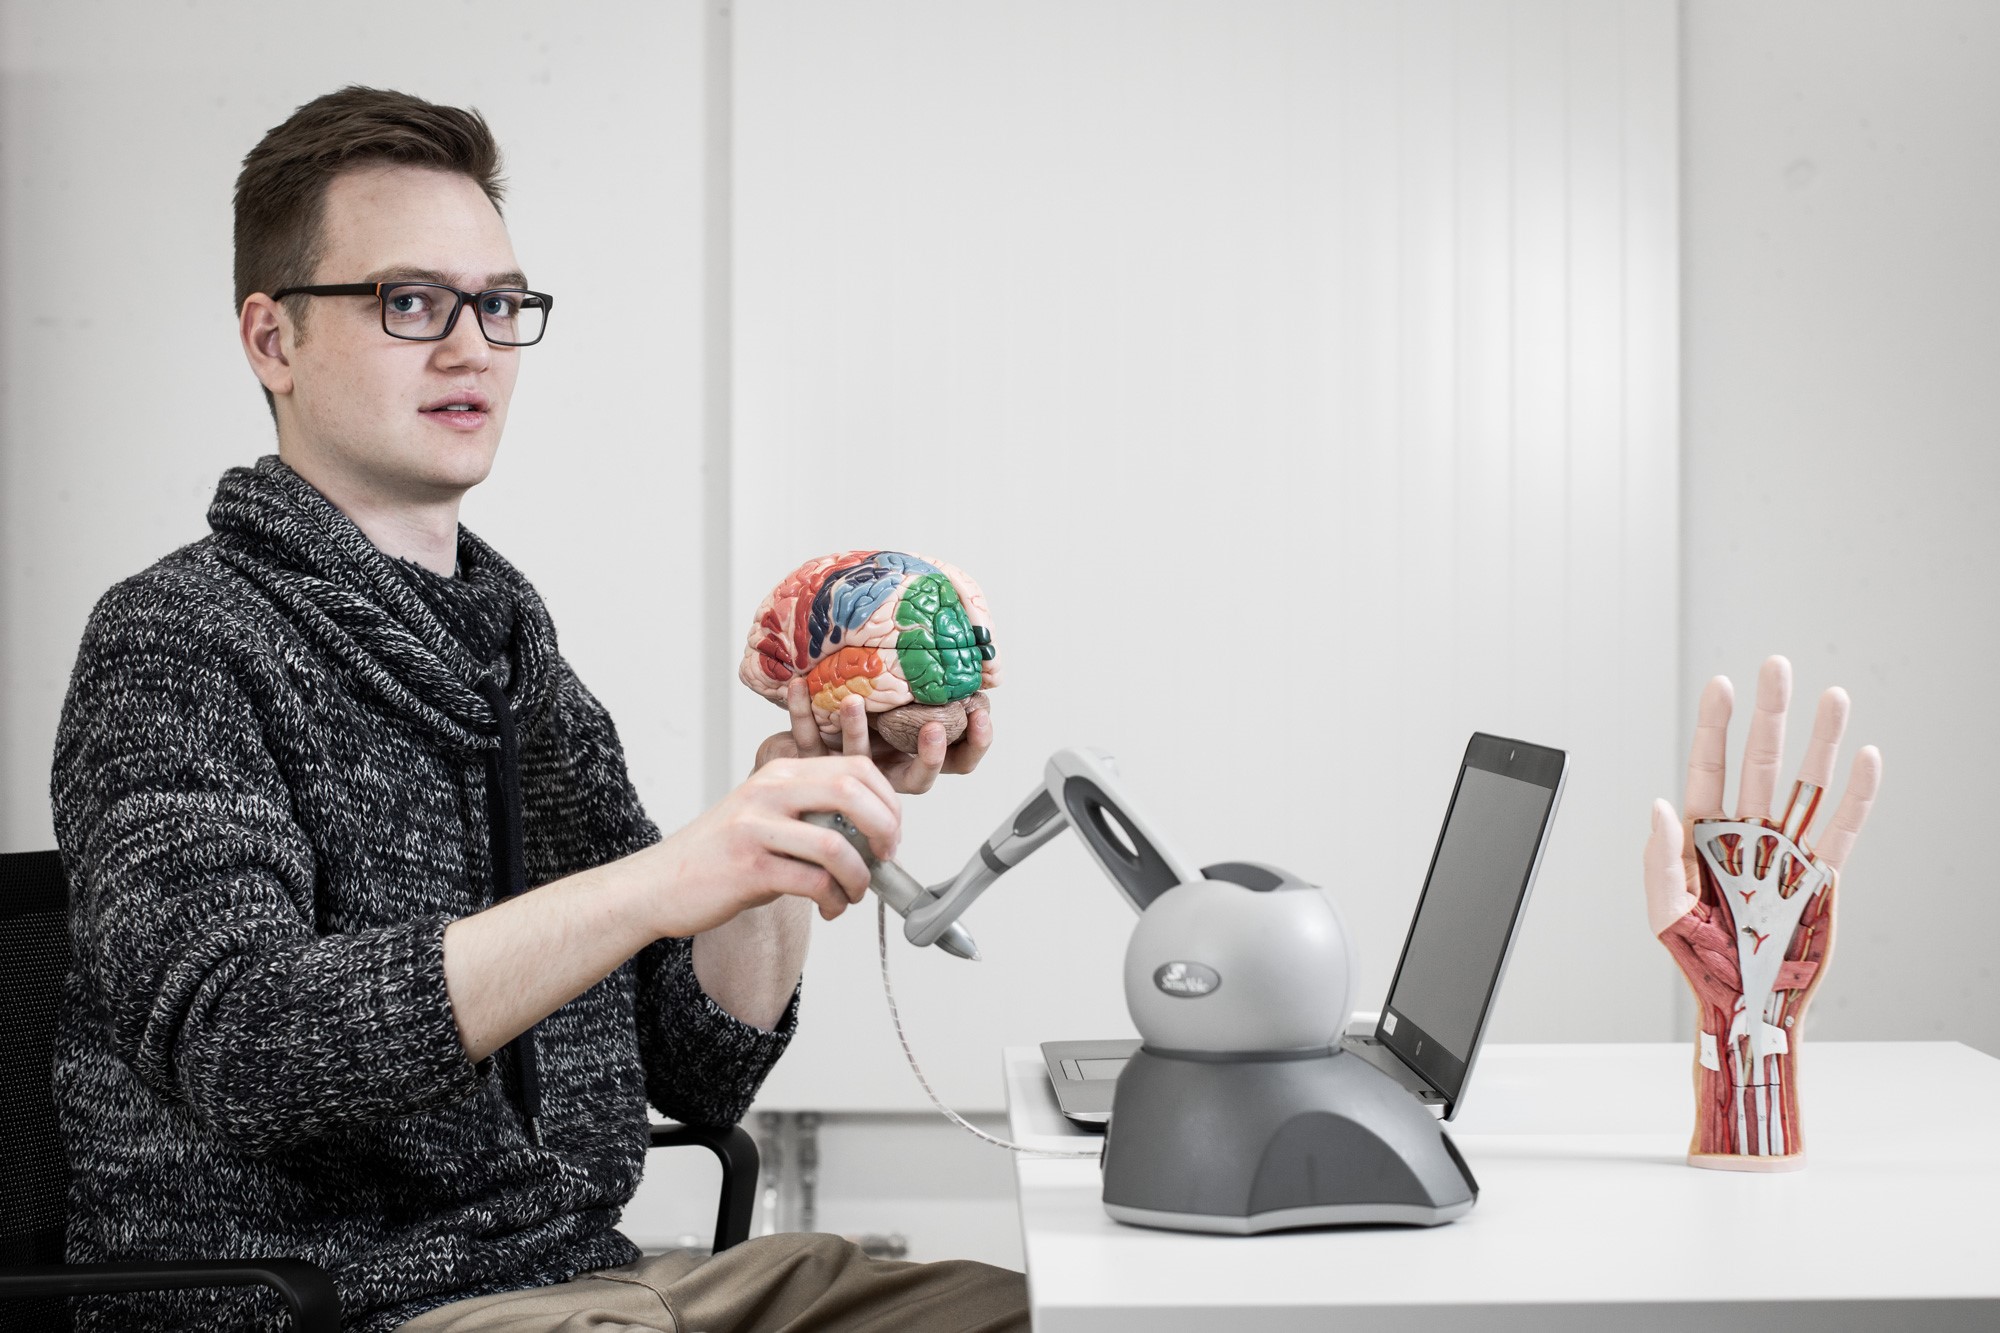 Enlarged view: Chrisoph Kanzler with VPIT device and a stylized artificial brain in his hand. Next to it is a stylized artificial hand in which the components are highlighted in color.